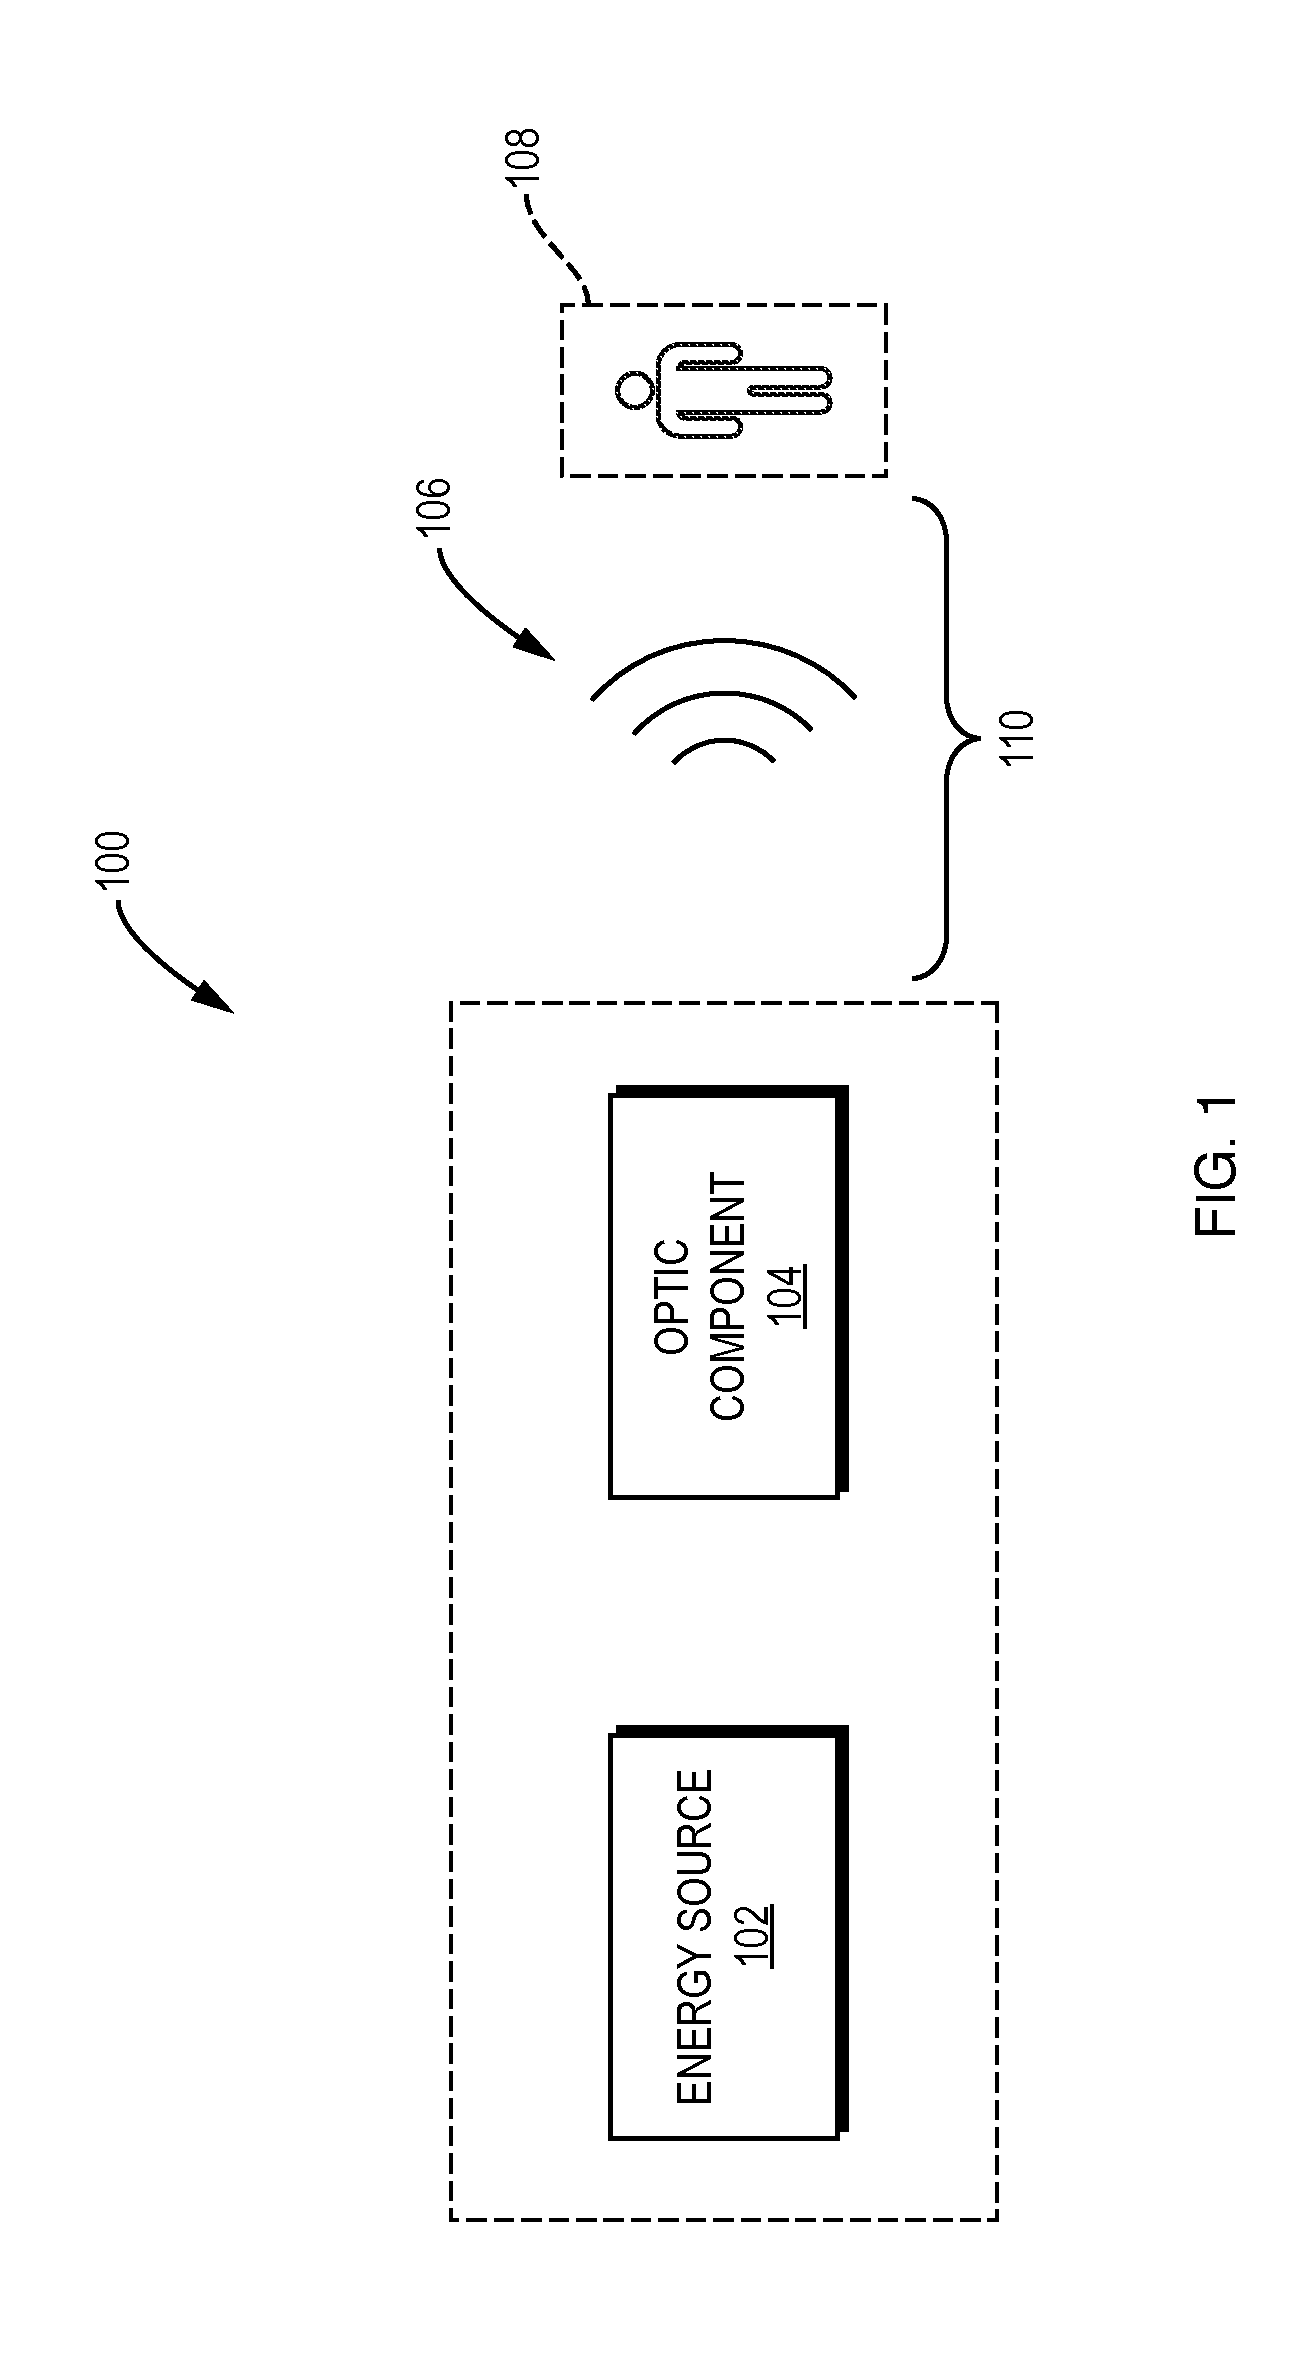 Device for personal heating using a directed energy beam